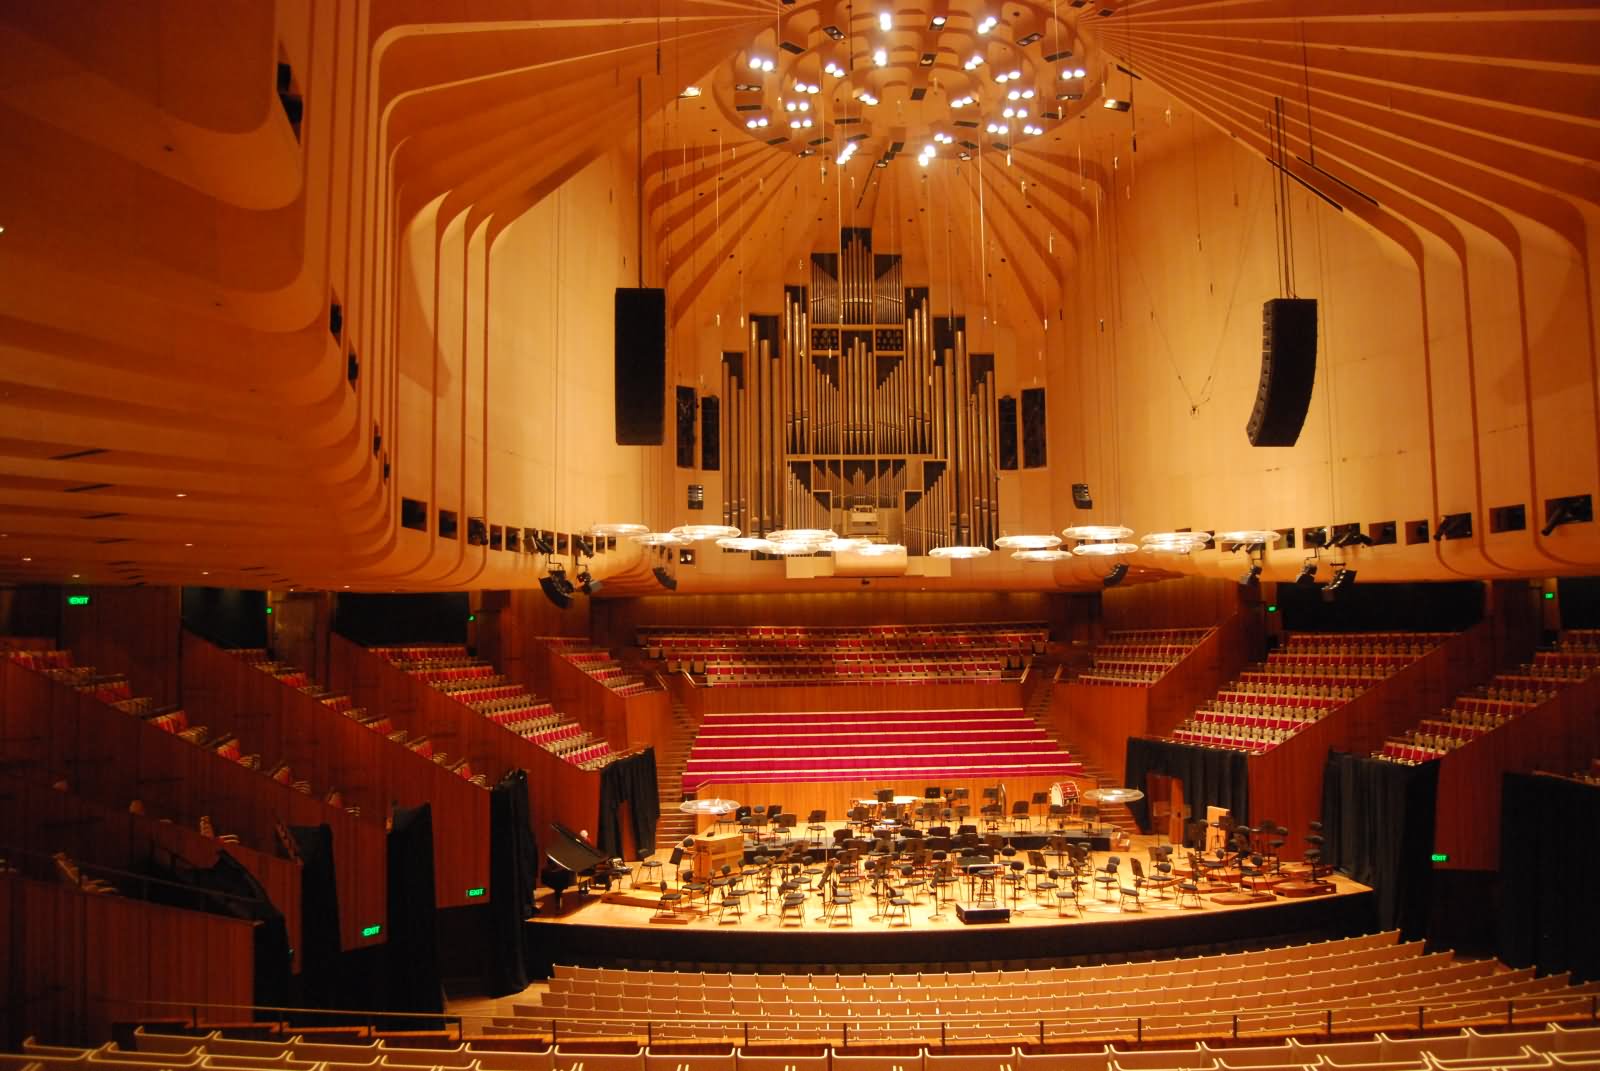 15 Sydney Opera House Interior Picture And Photos